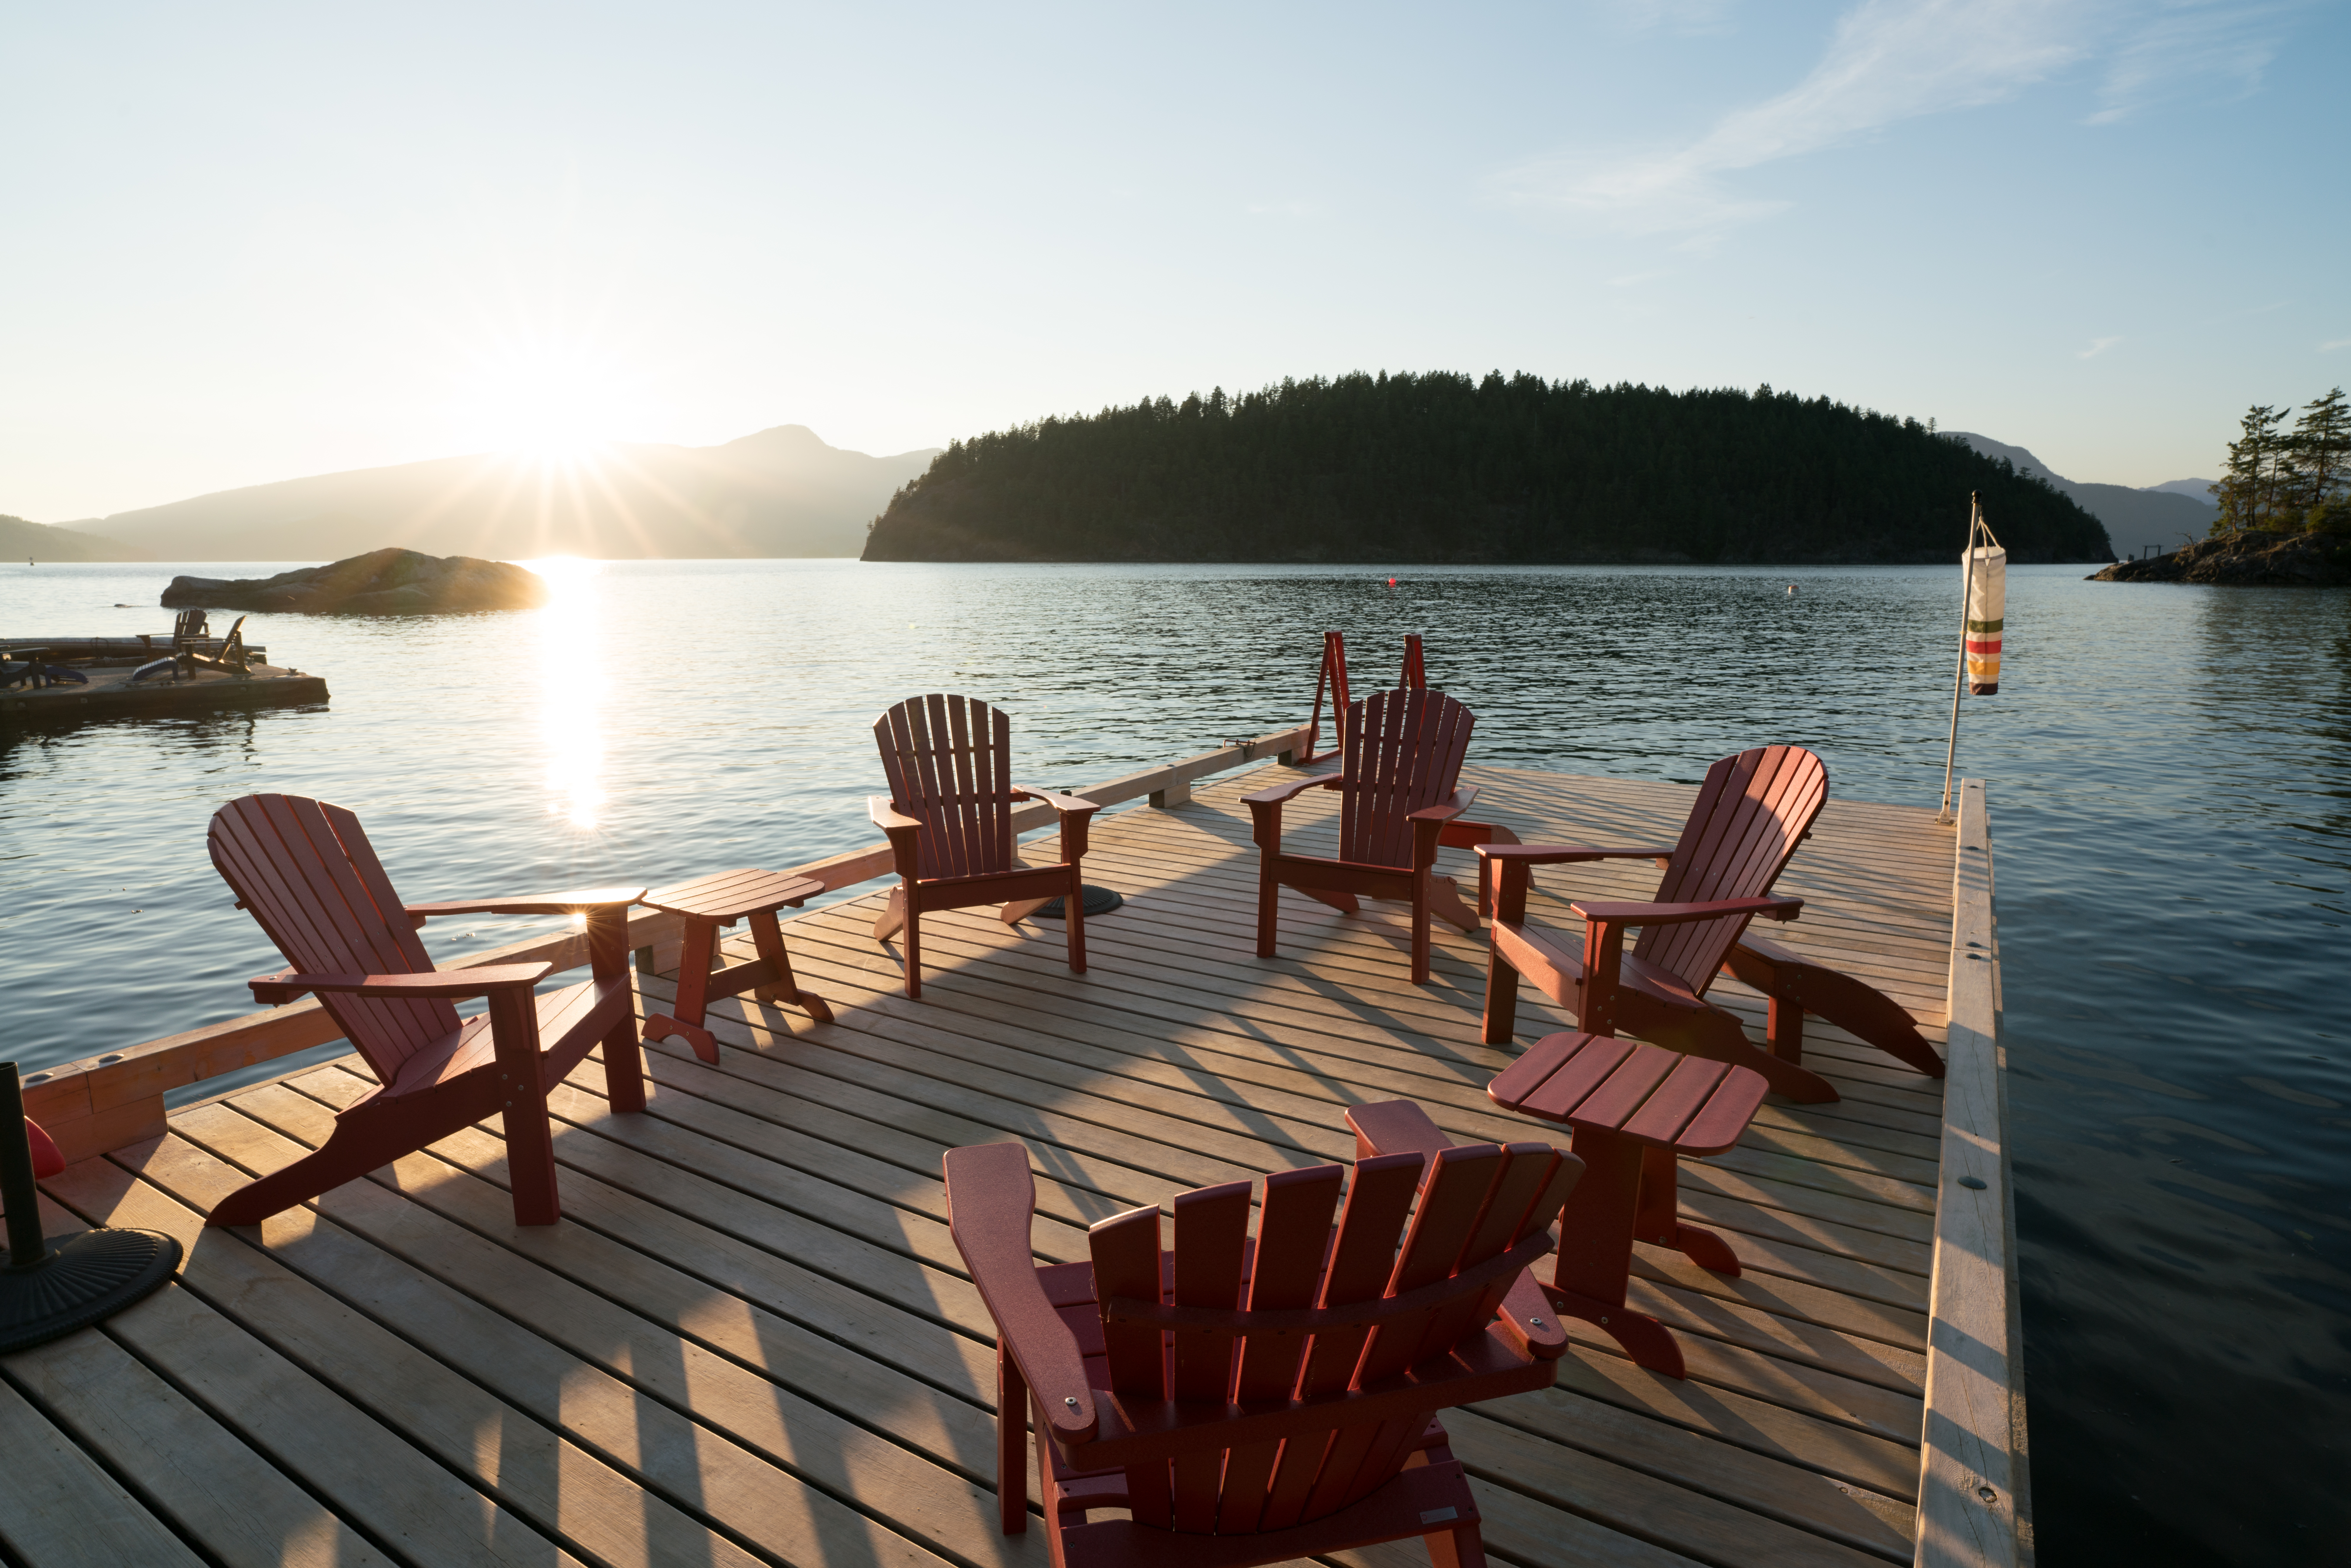 Extensive dock area with red chairs at a custom home on Bowen Island.